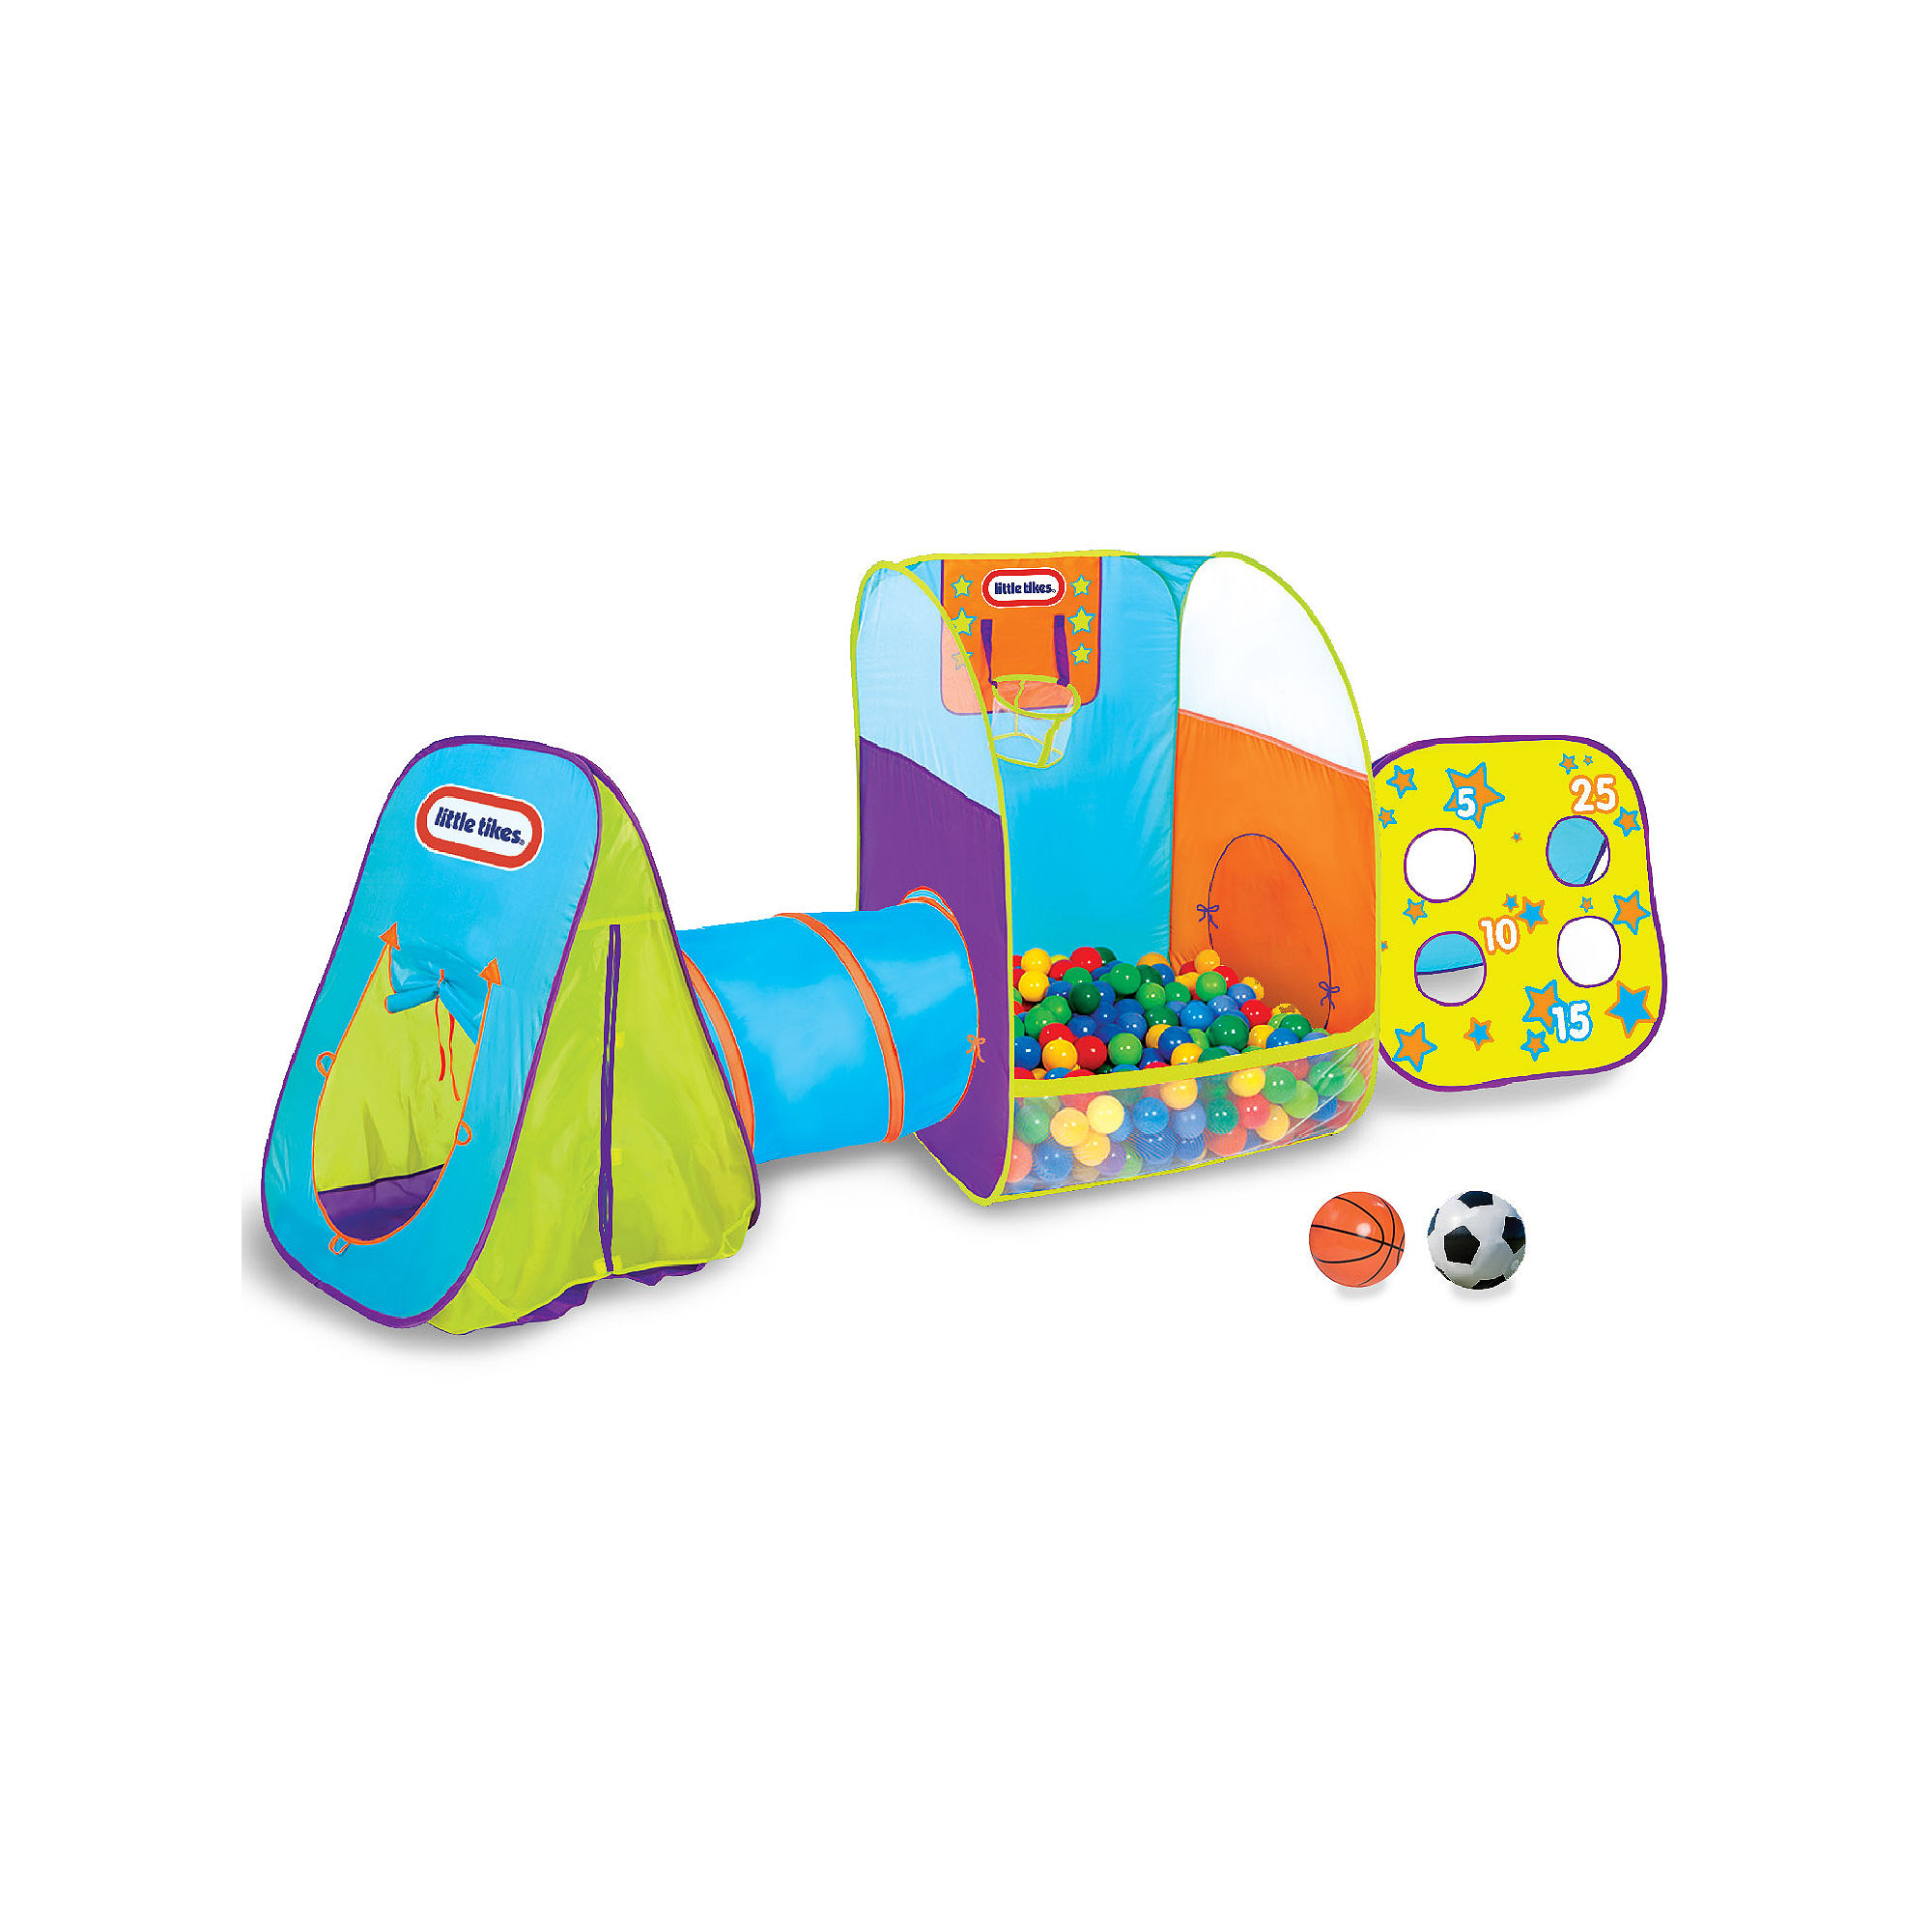 Little Tikes Pop Up Fun Zone Tent - image 1 of 3